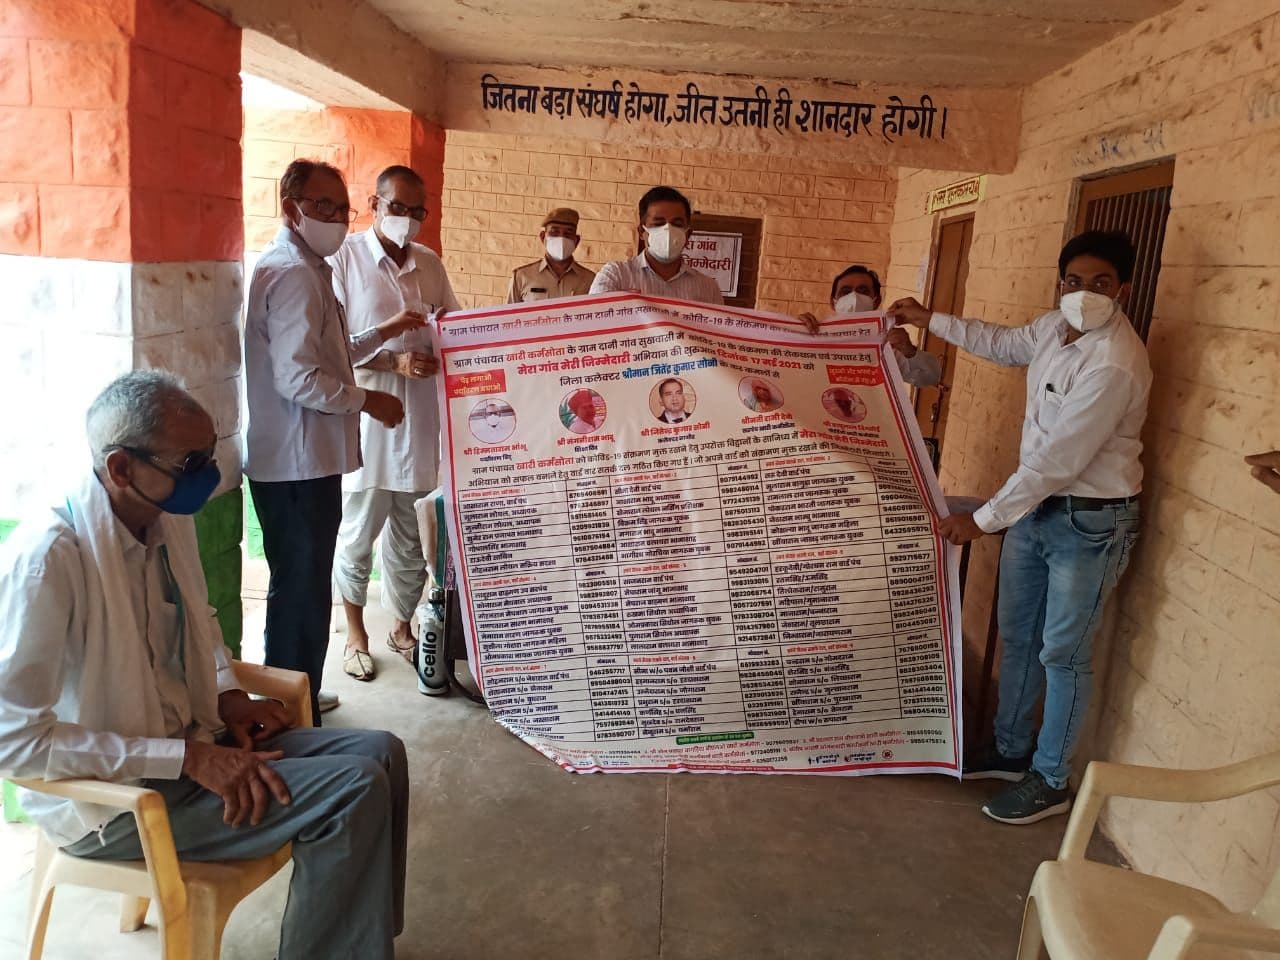 Initiative of campaign 'My village - My responsibility' from Sukhwasi